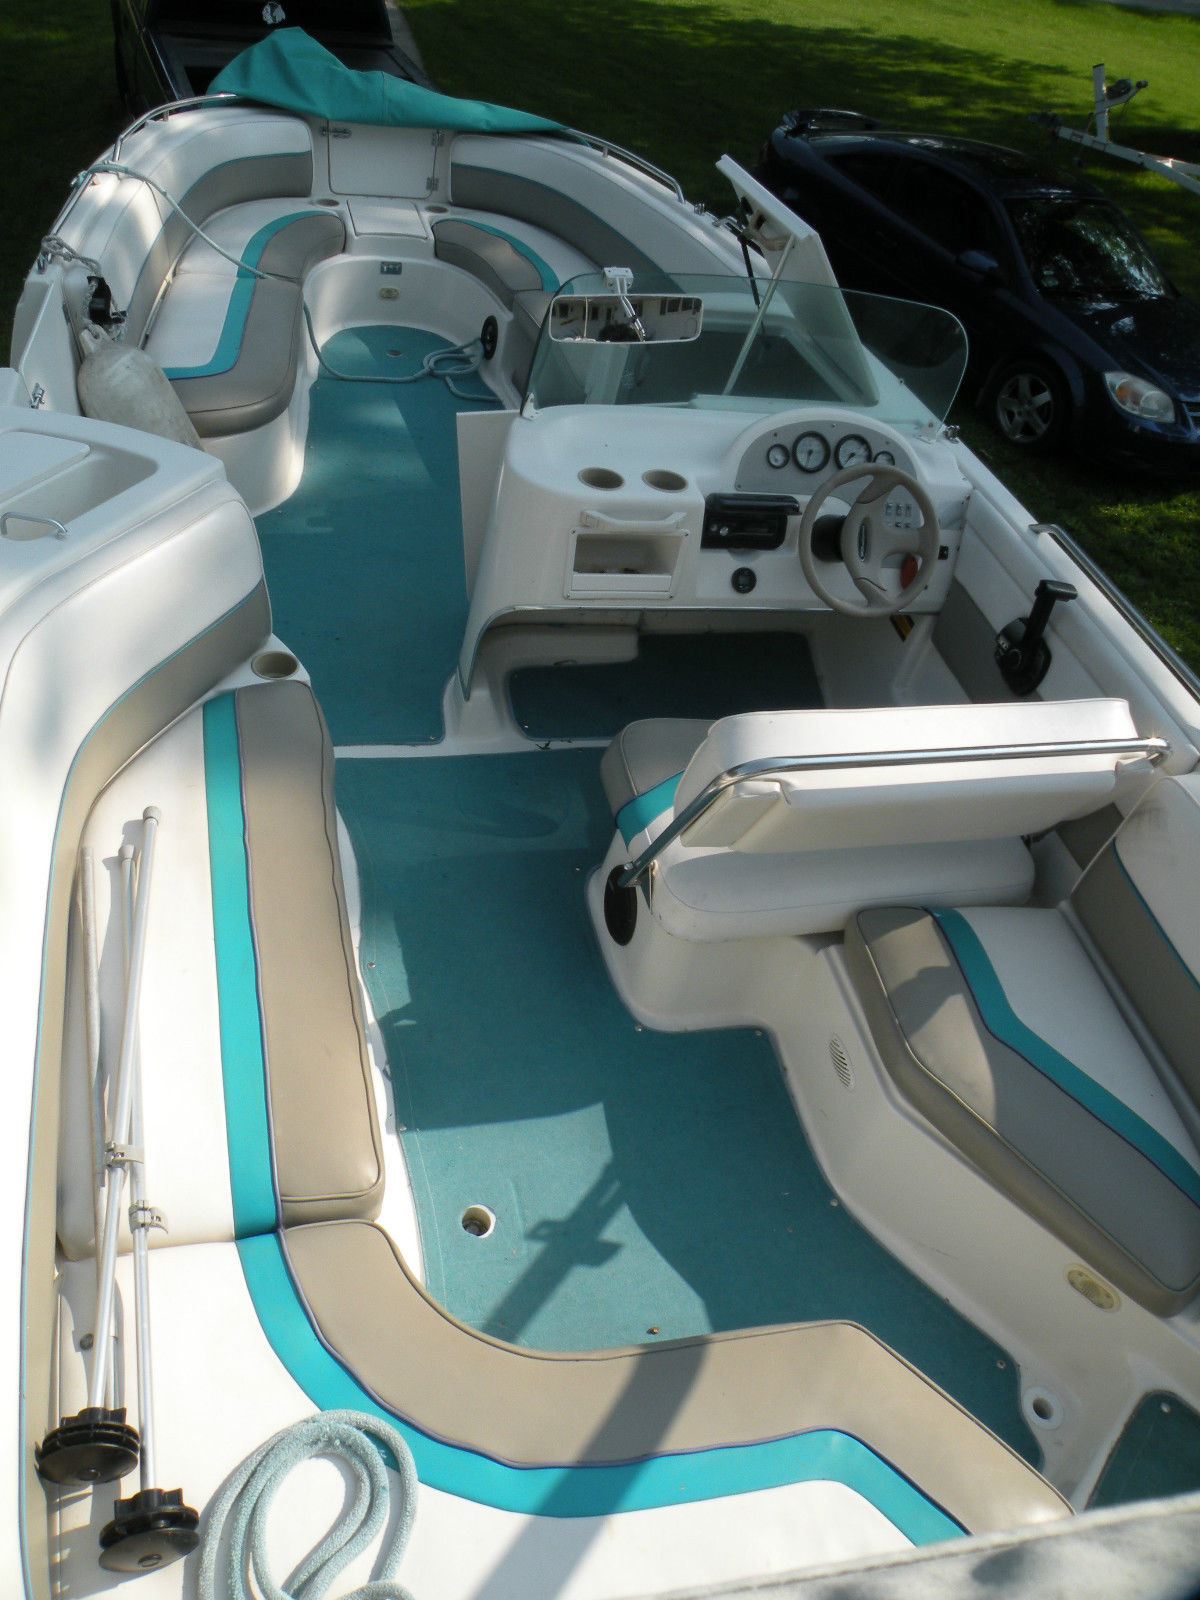 Bayliner Rendezvous 1997 for sale for $13,500 - Boats-from 